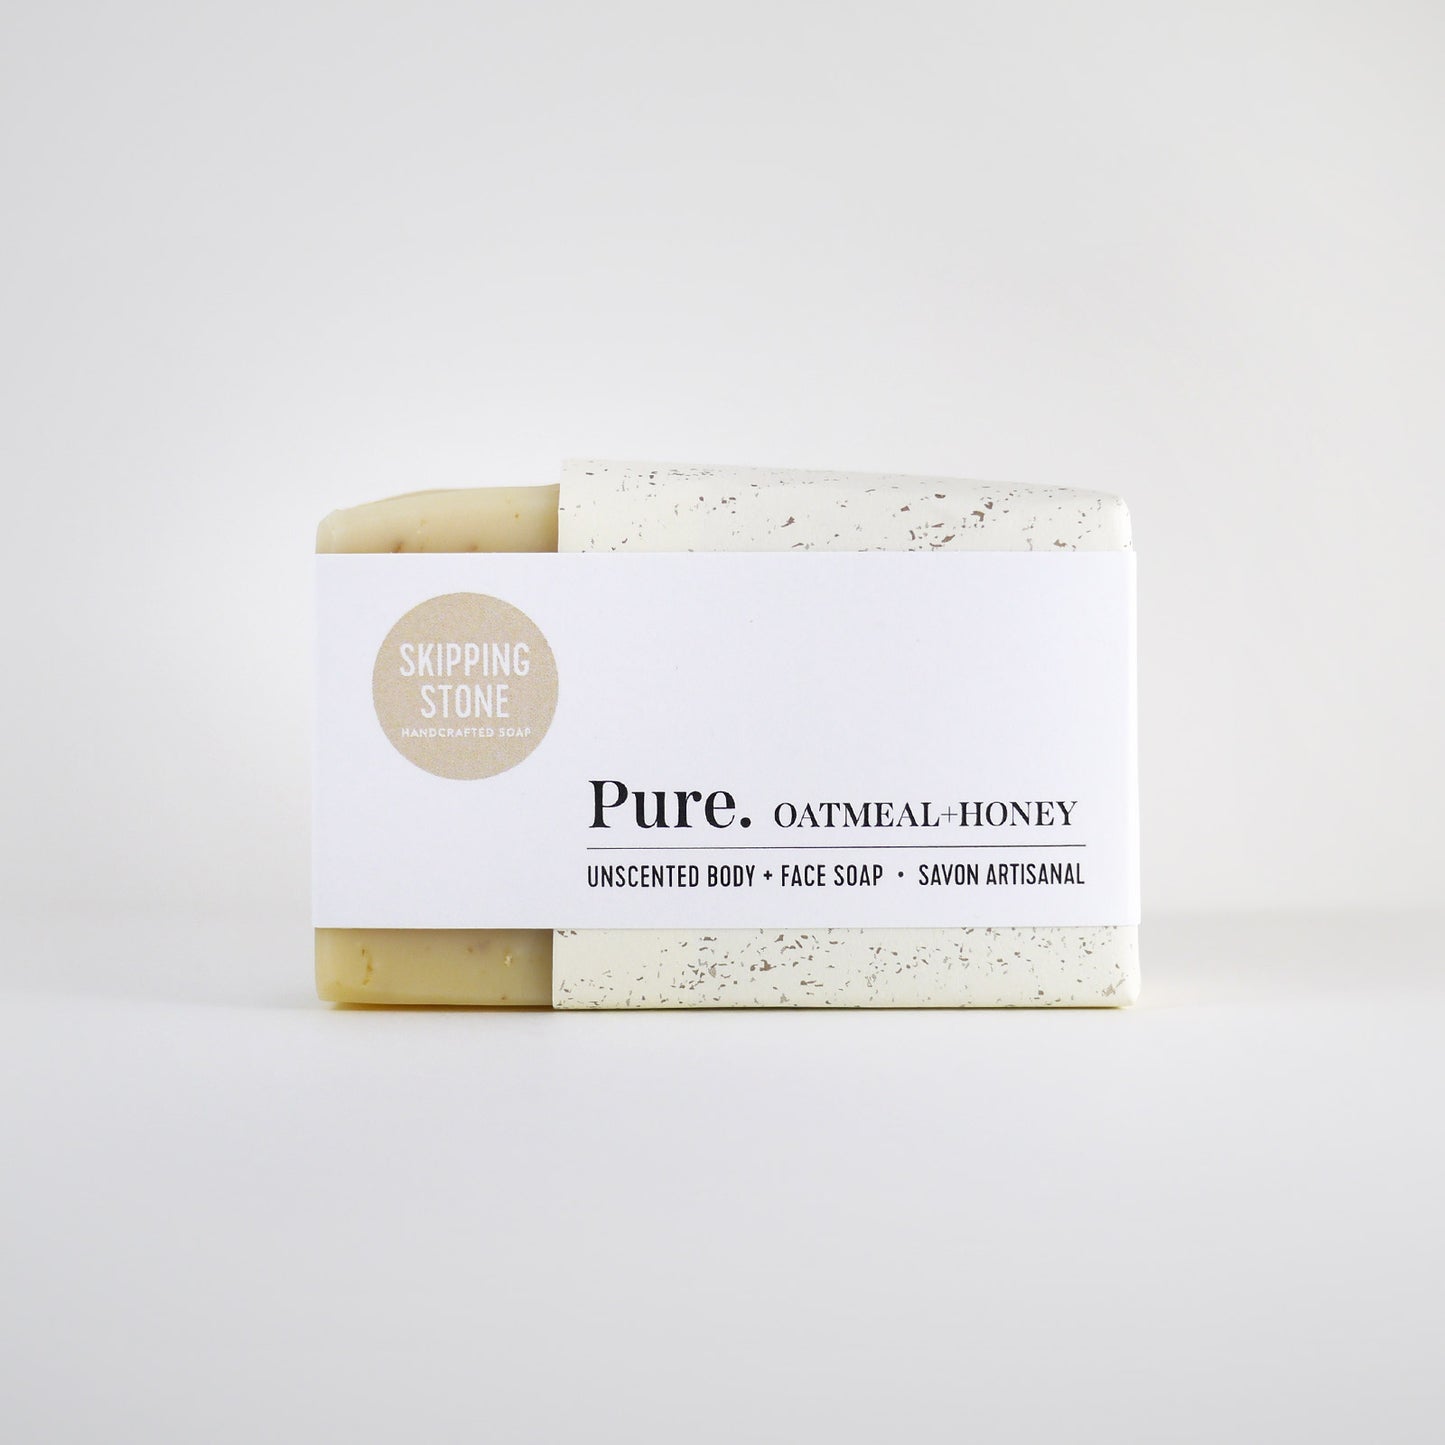 Pure. Oatmeal + Honey Body + Face Soap – unscented